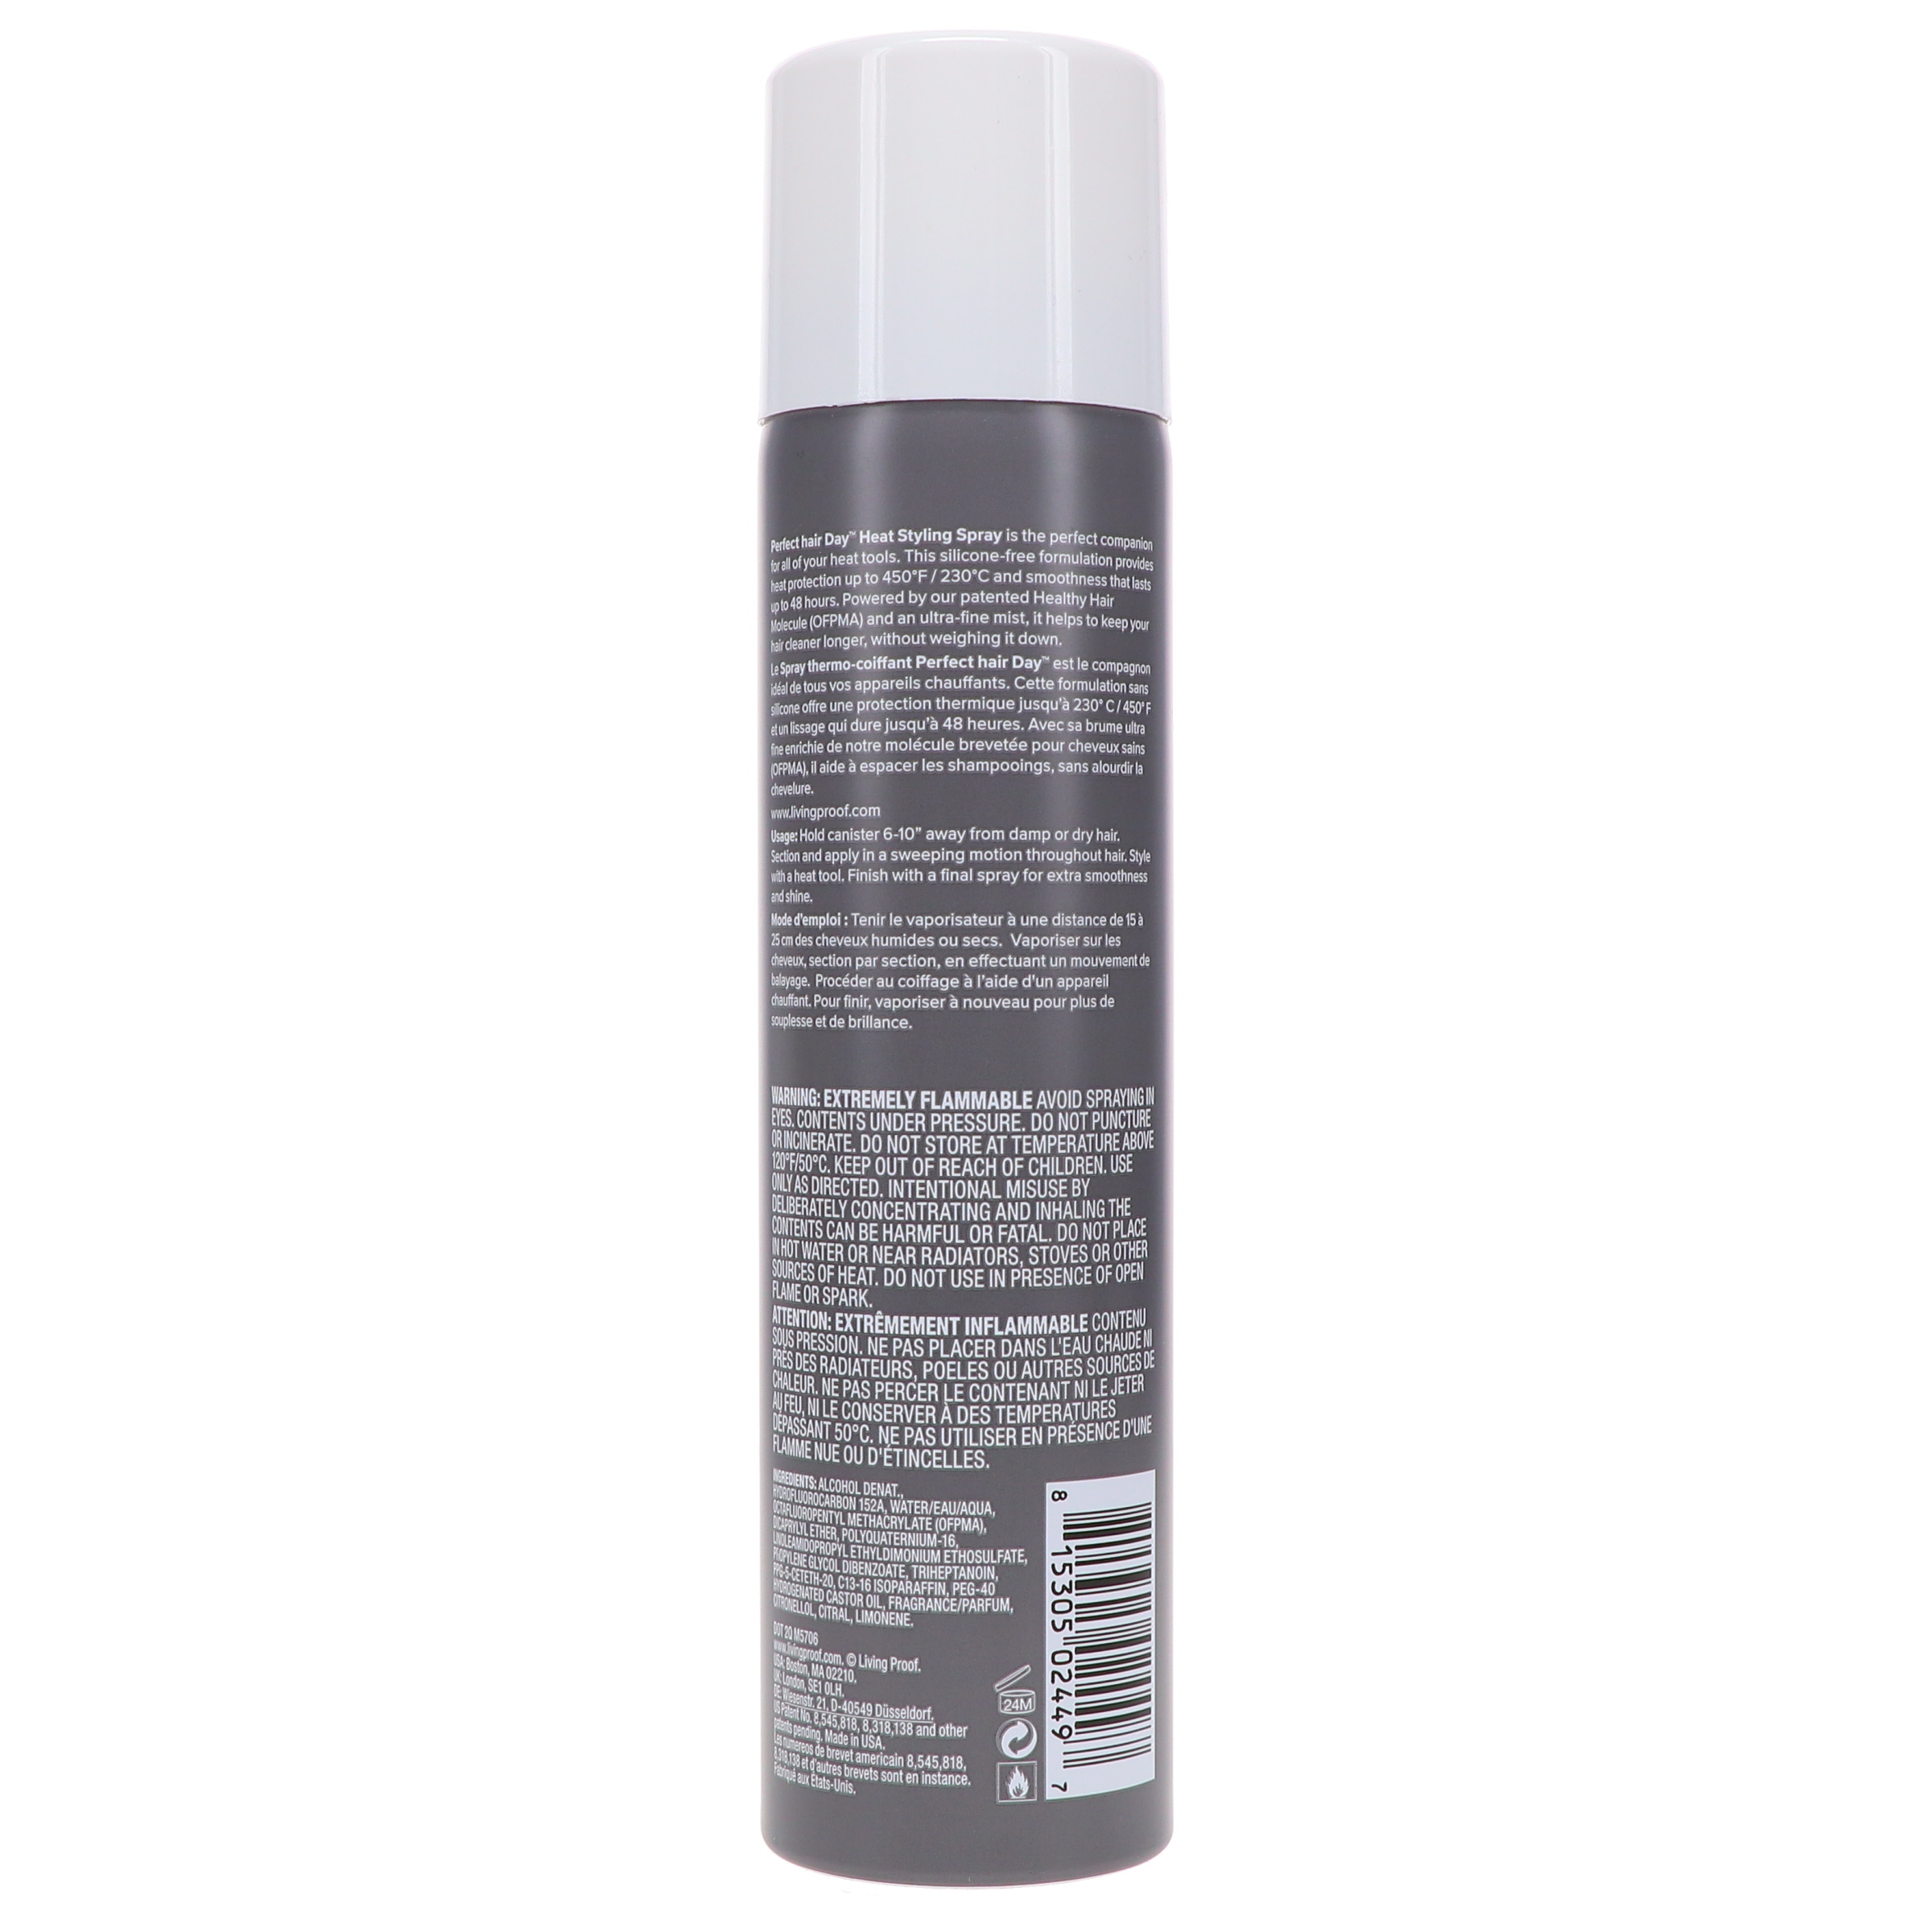 Living Proof Perfect Hair Day Heat Styling Spray 5.5 oz - image 5 of 7